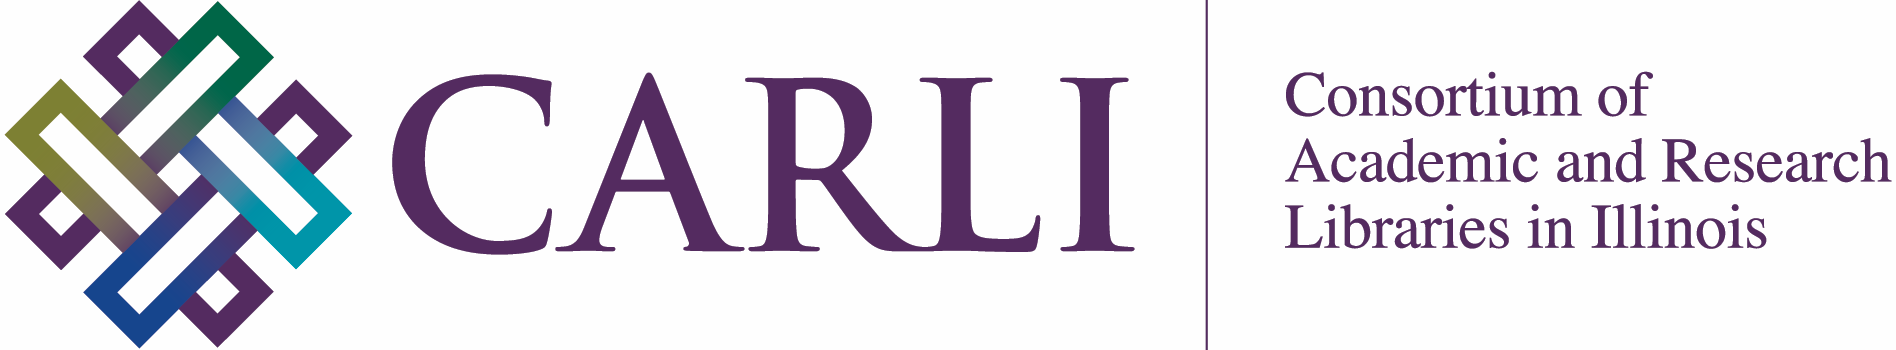 CARLI: Consortium of Academic and Research Libraries in Illinois